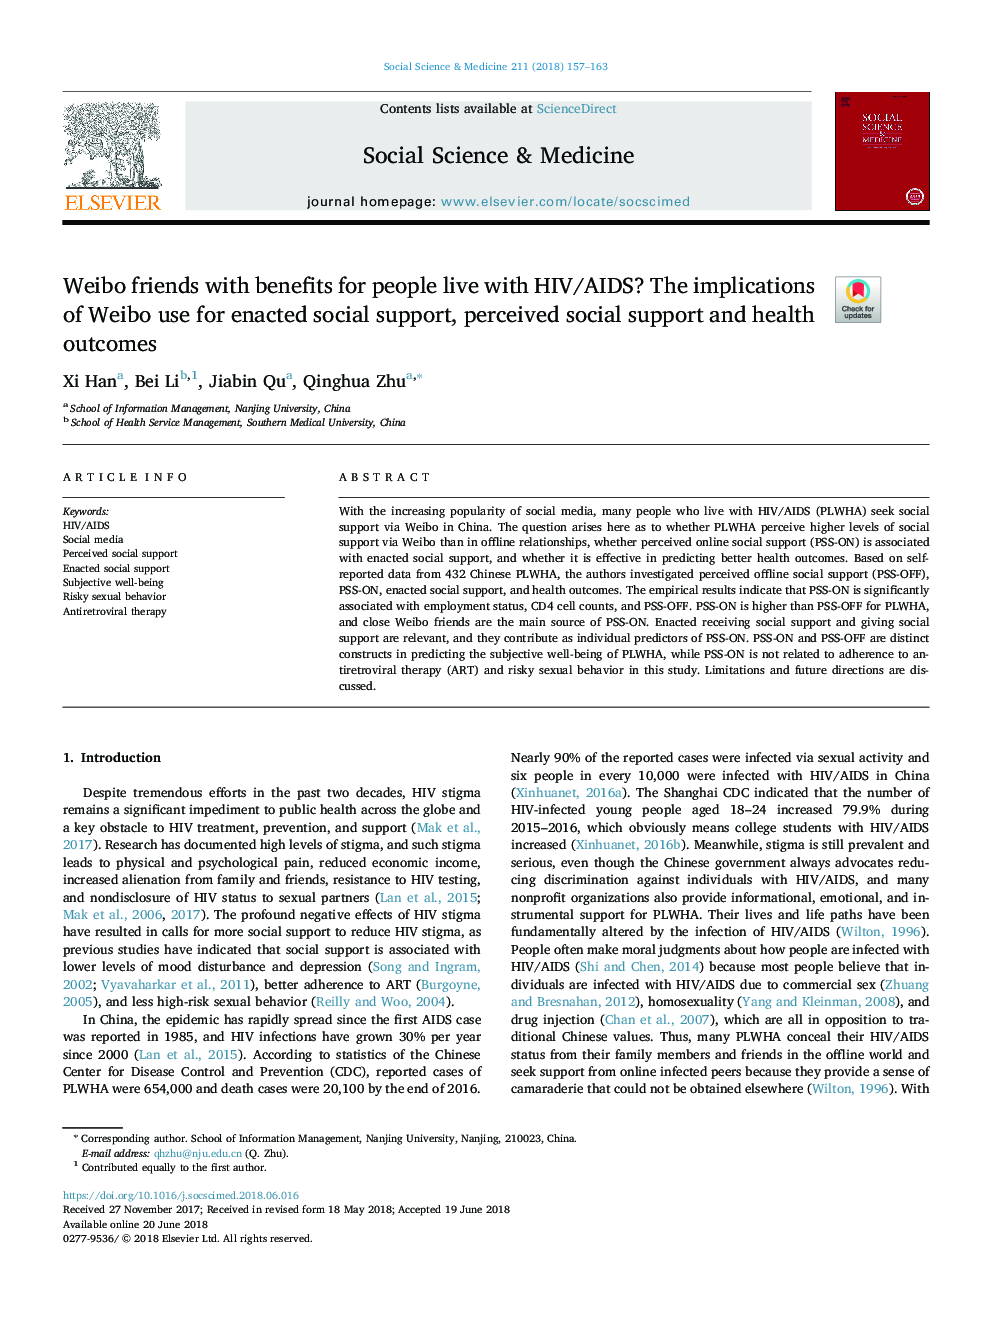 Weibo friends with benefits for people live with HIV/AIDS? The implications of Weibo use for enacted social support, perceived social support and health outcomes